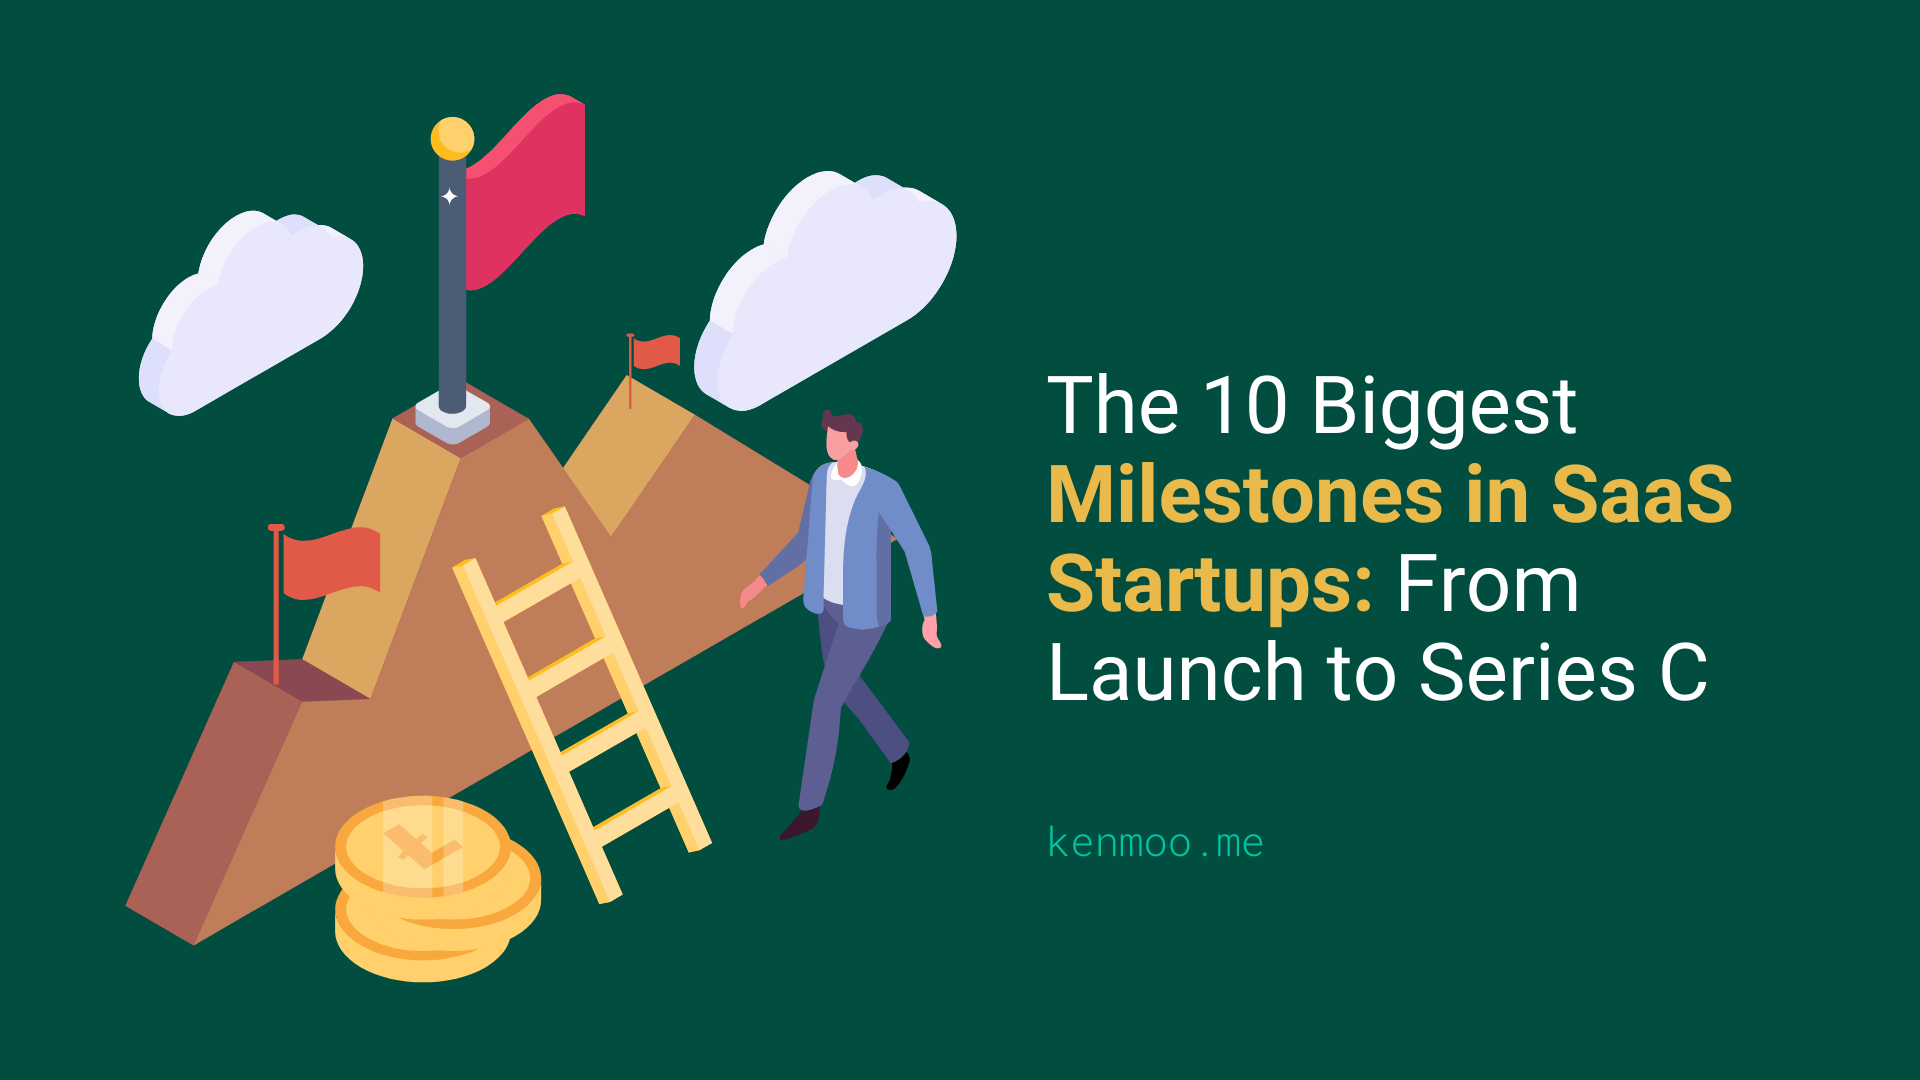 The 10 Biggest Milestones in SaaS Startups: From Launch to Series C